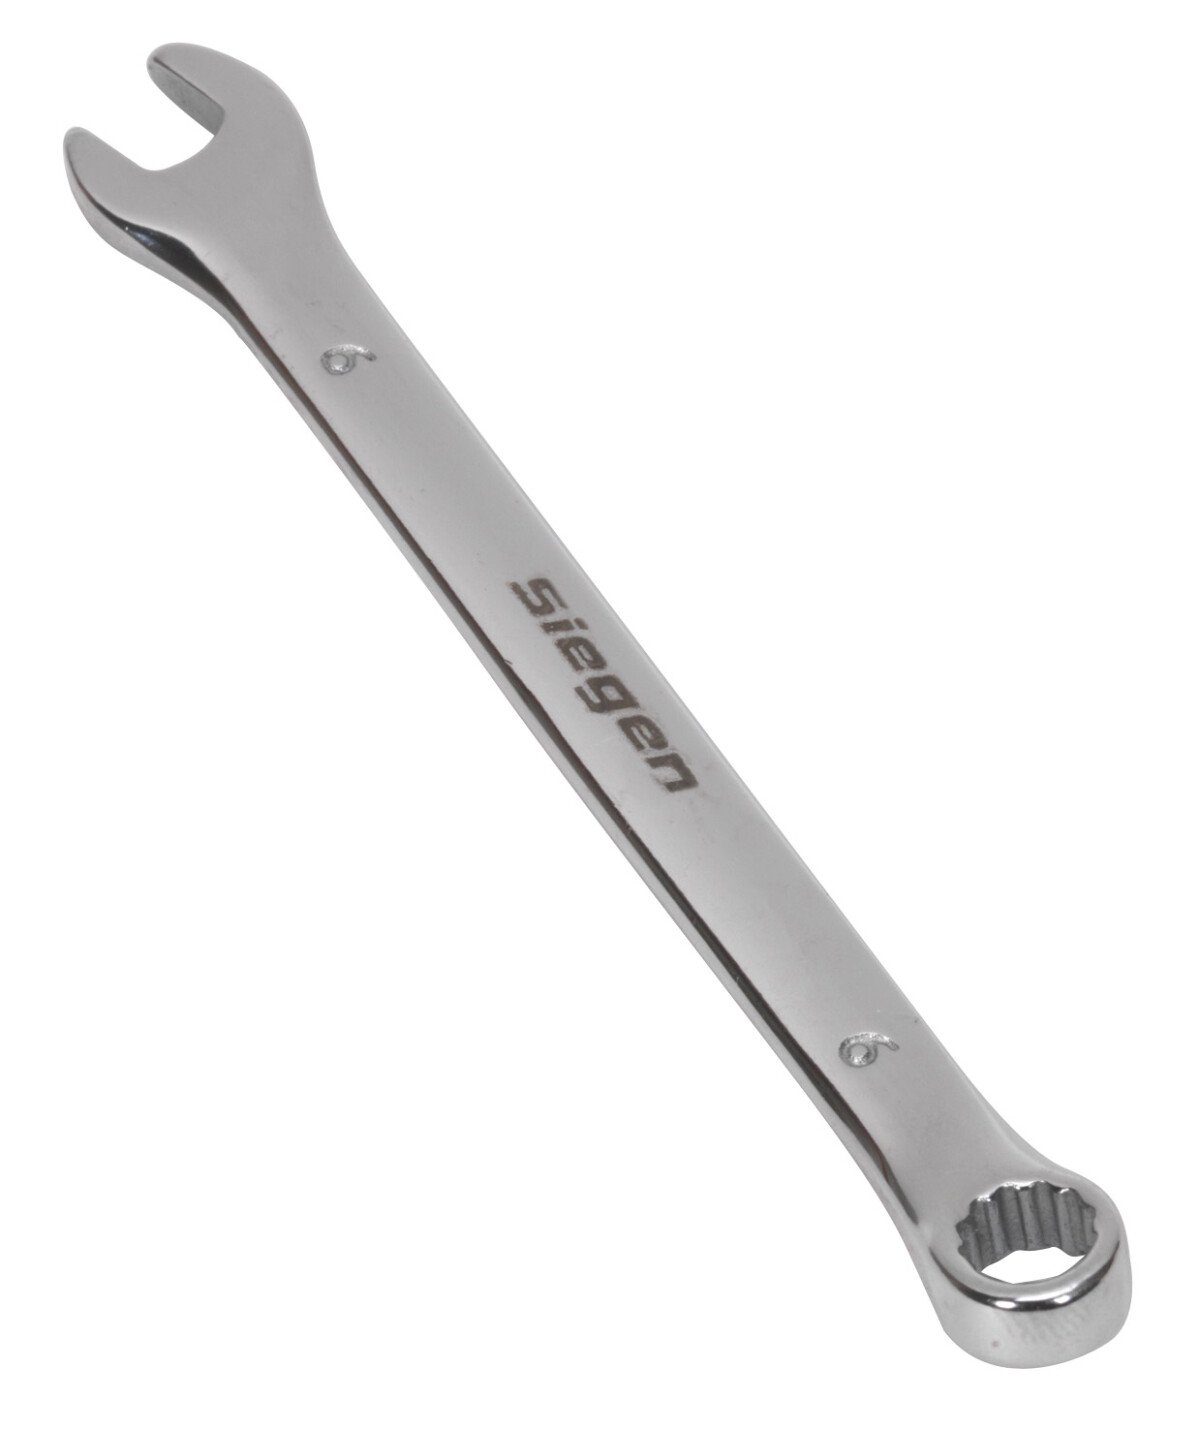 Sealey S01006 Combination Spanner 6mm